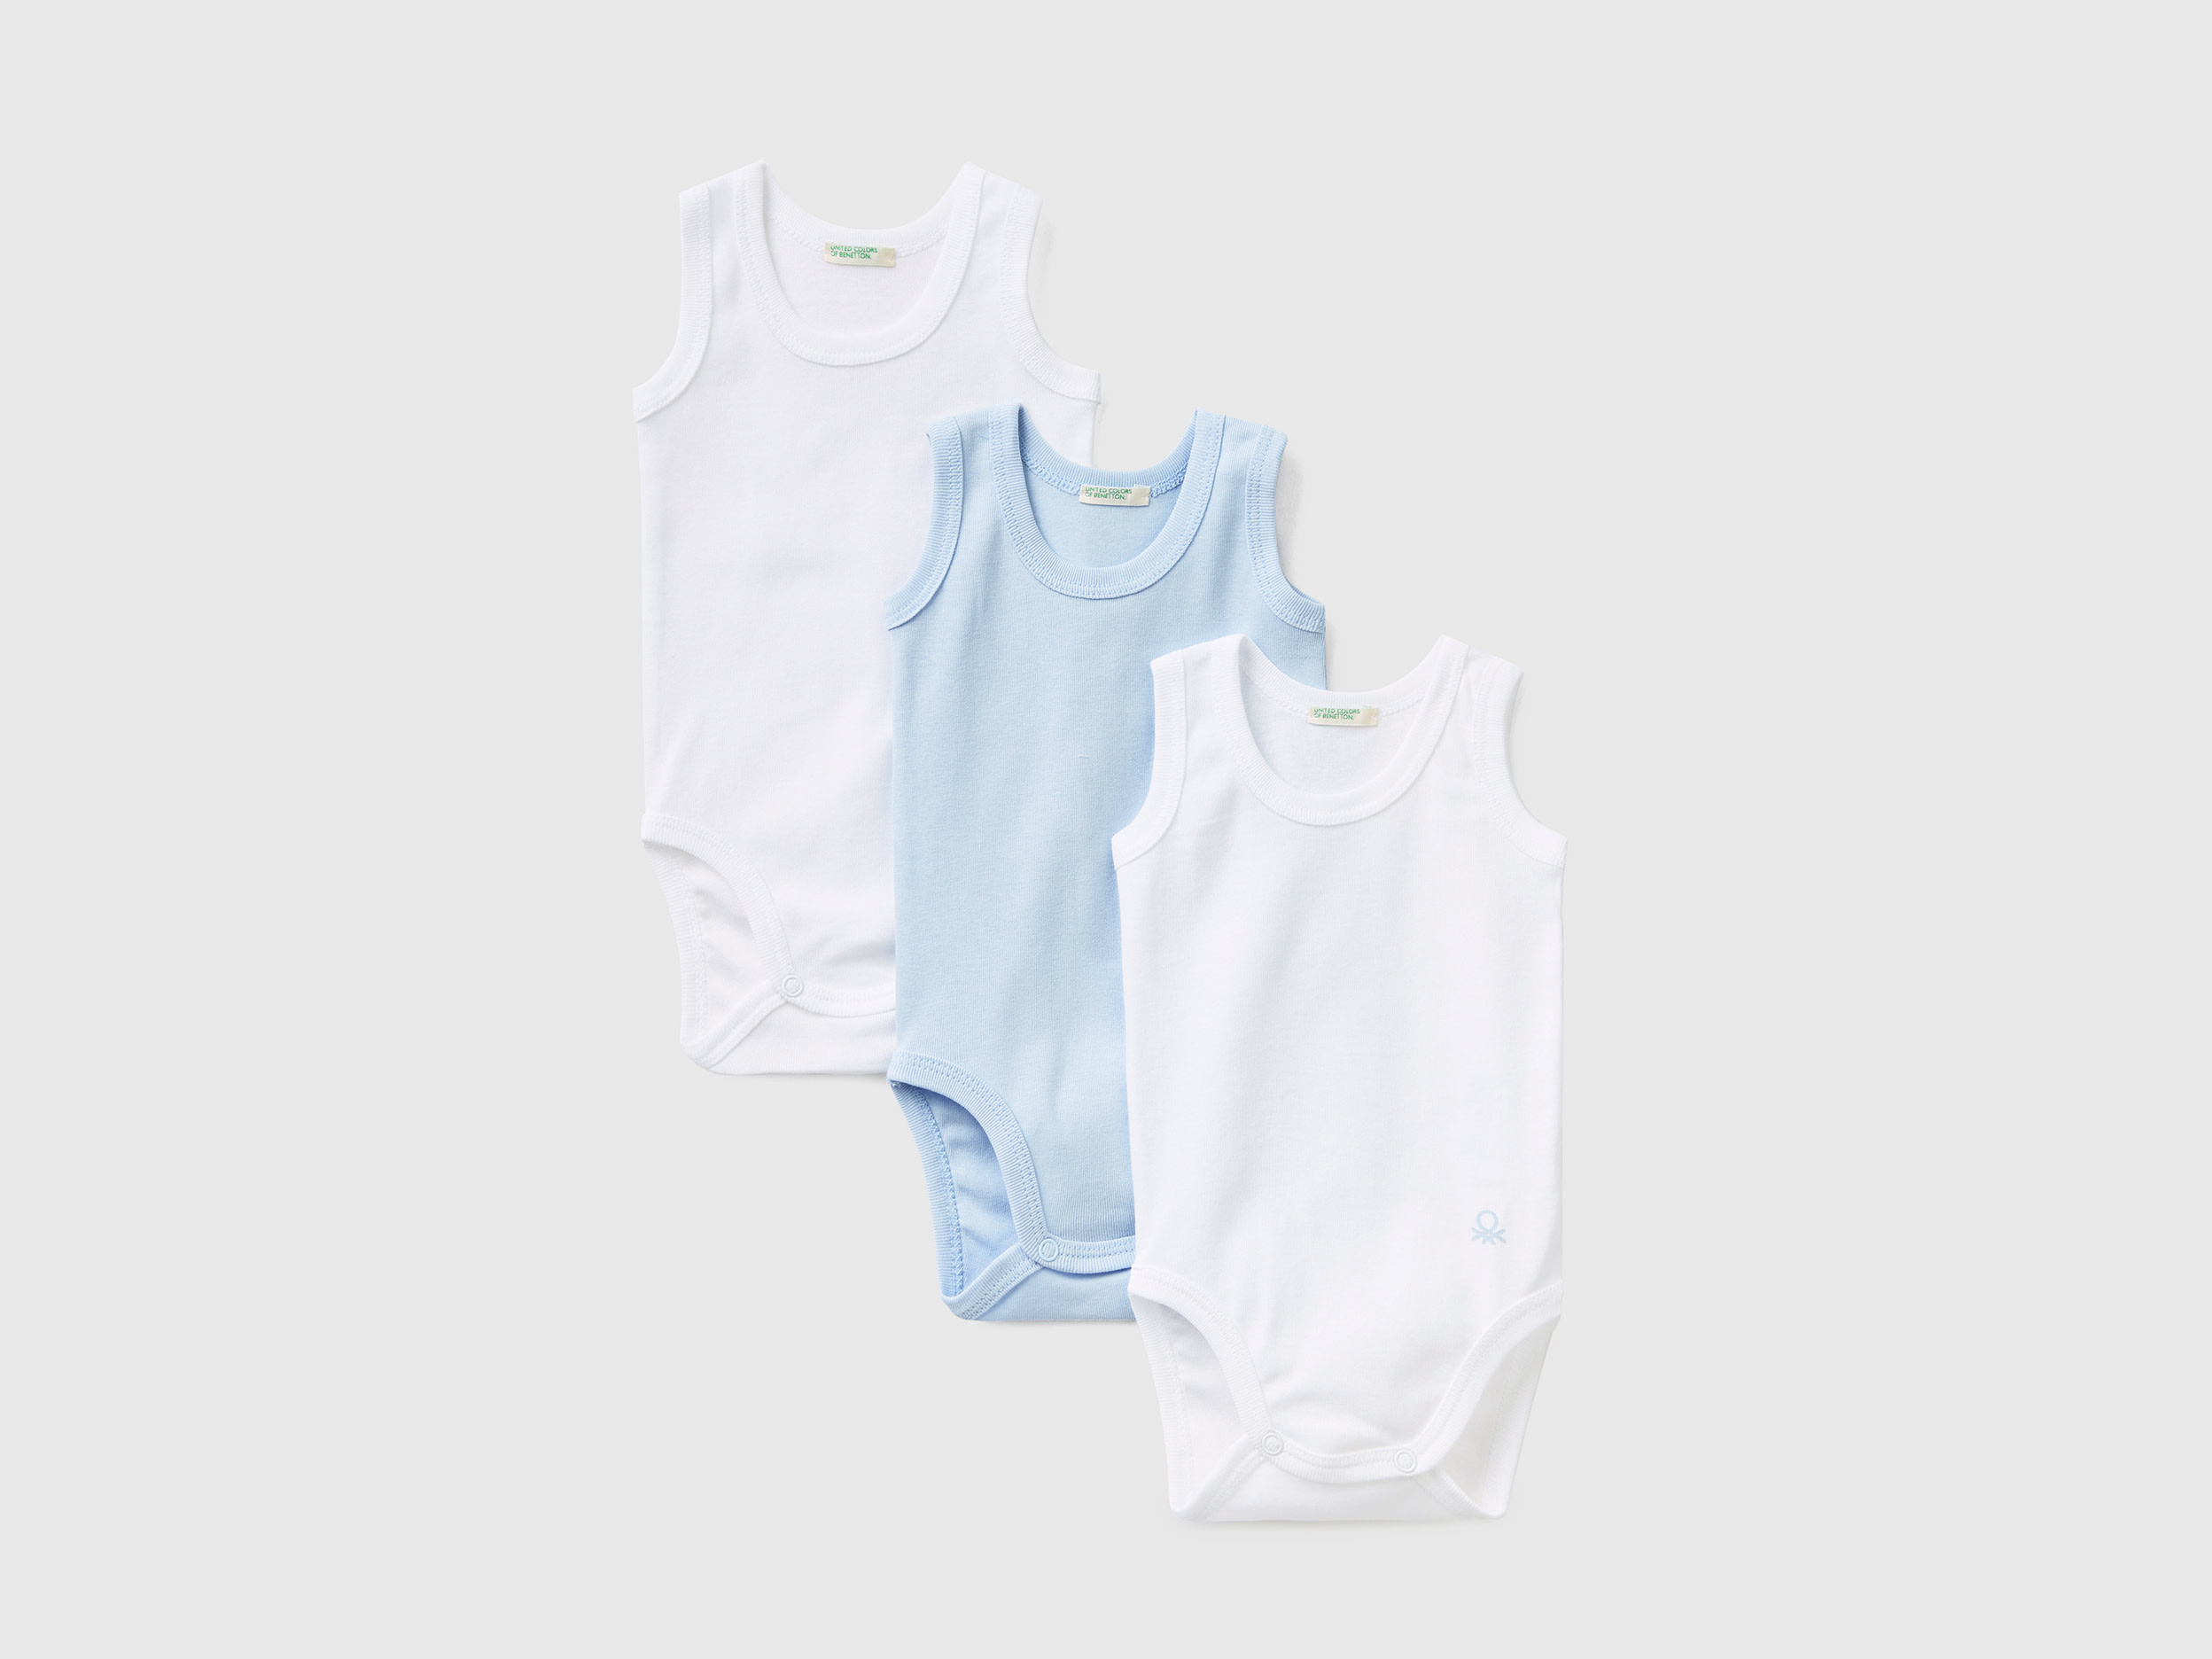 Benetton, Three Solid Color Tank Top Bodysuits, size 18-24, Light Blue, Kids